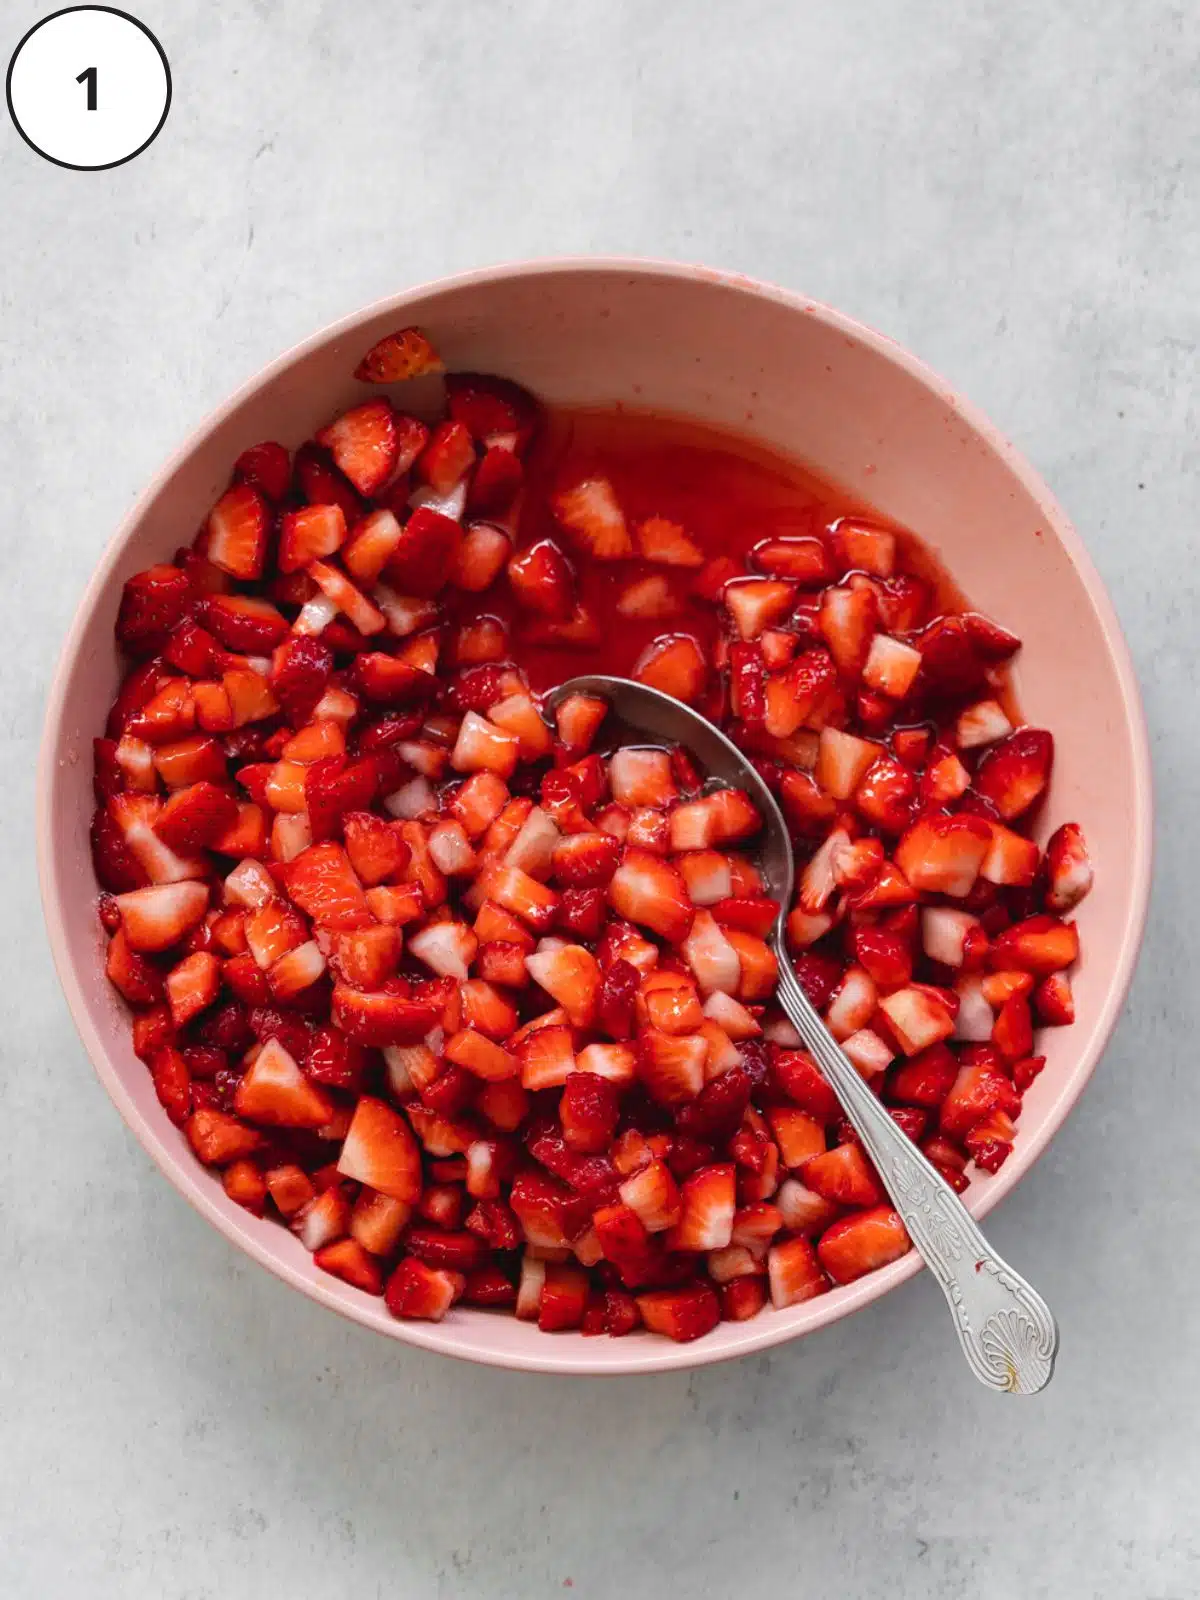 strawberry chunks macerating in in a large bowl with sugar, showing the juices being released from the berries.